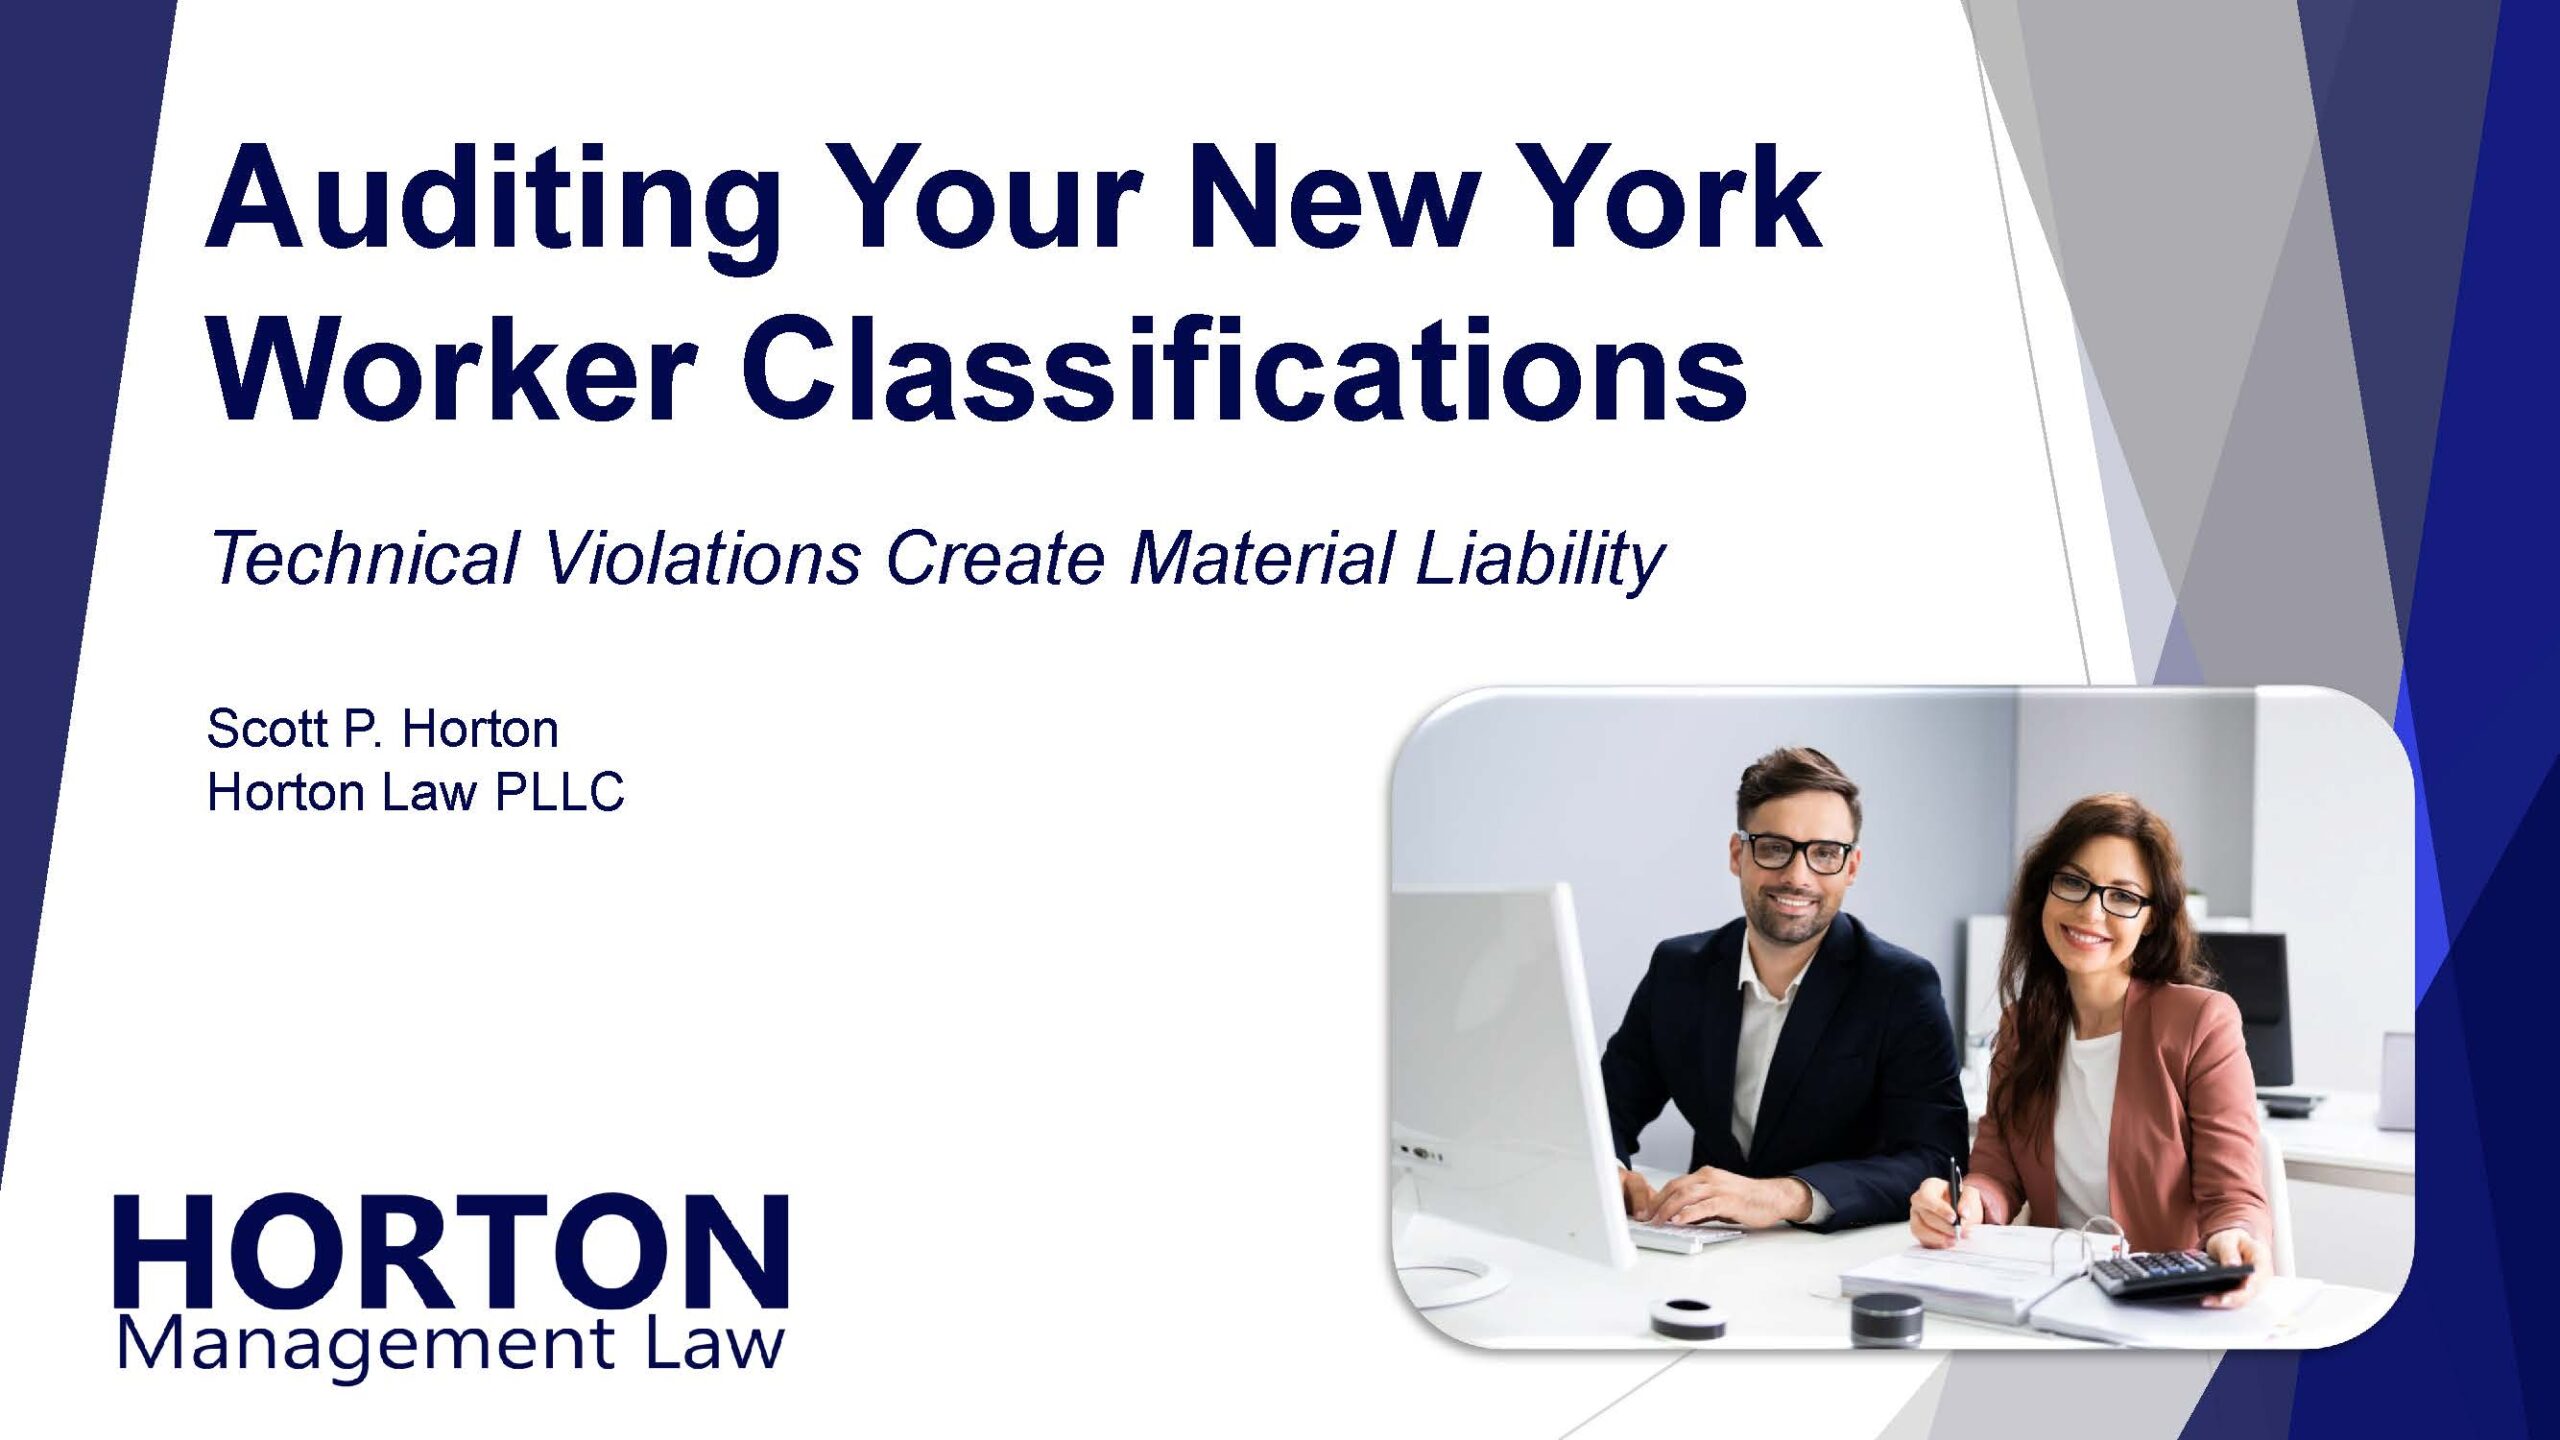 Auditing Your New York Worker Classifications Webinar Cover Slide